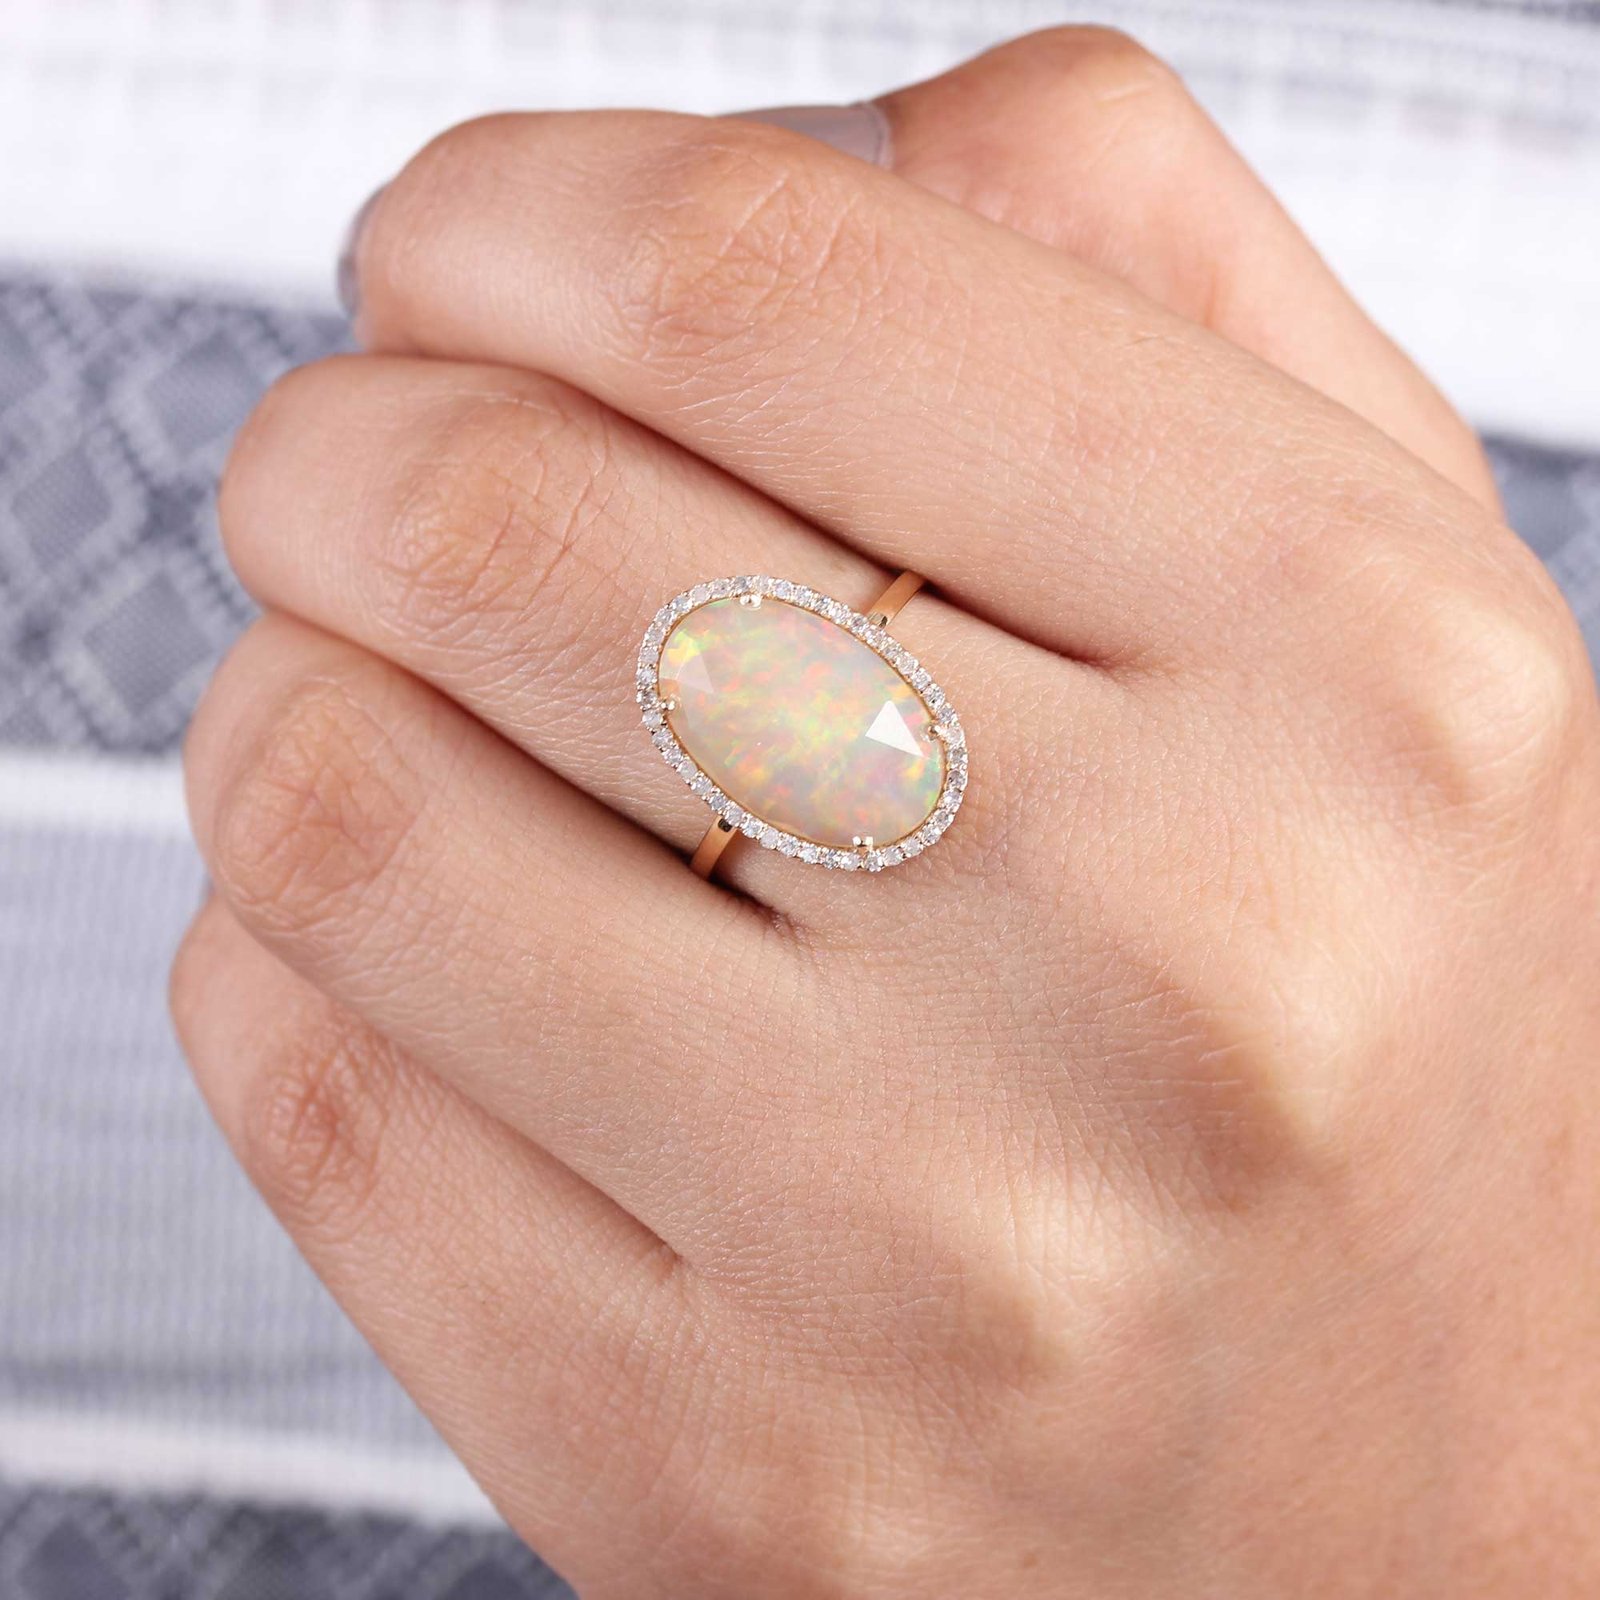 Gemstone Opal Pave Diamond Solid 14K Gold Ring Jewelry